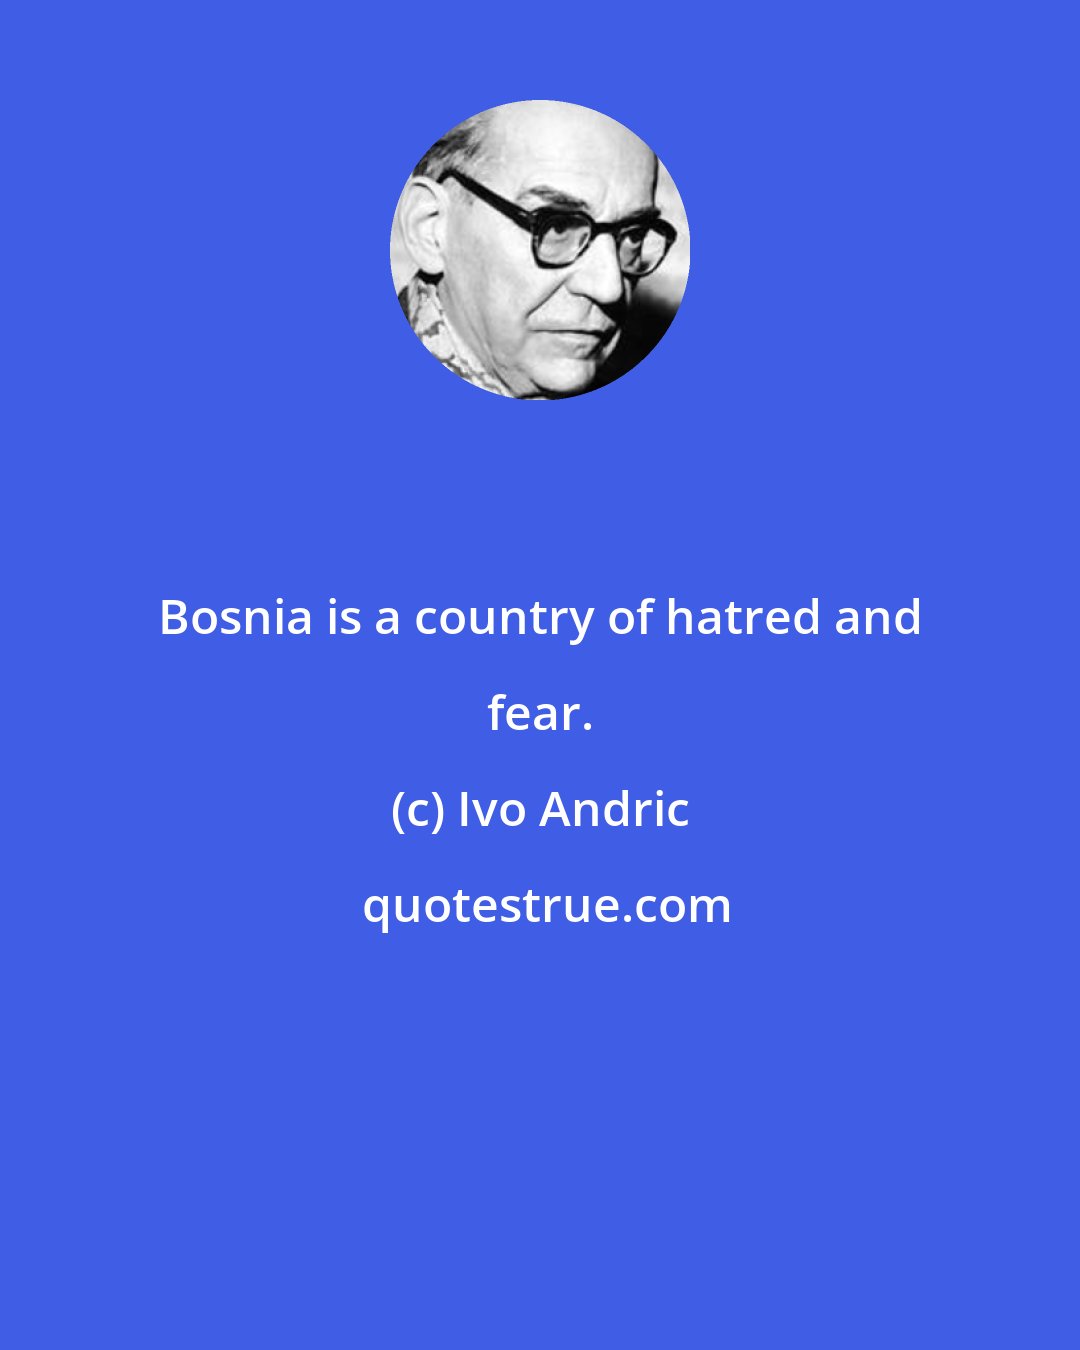 Ivo Andric: Bosnia is a country of hatred and fear.